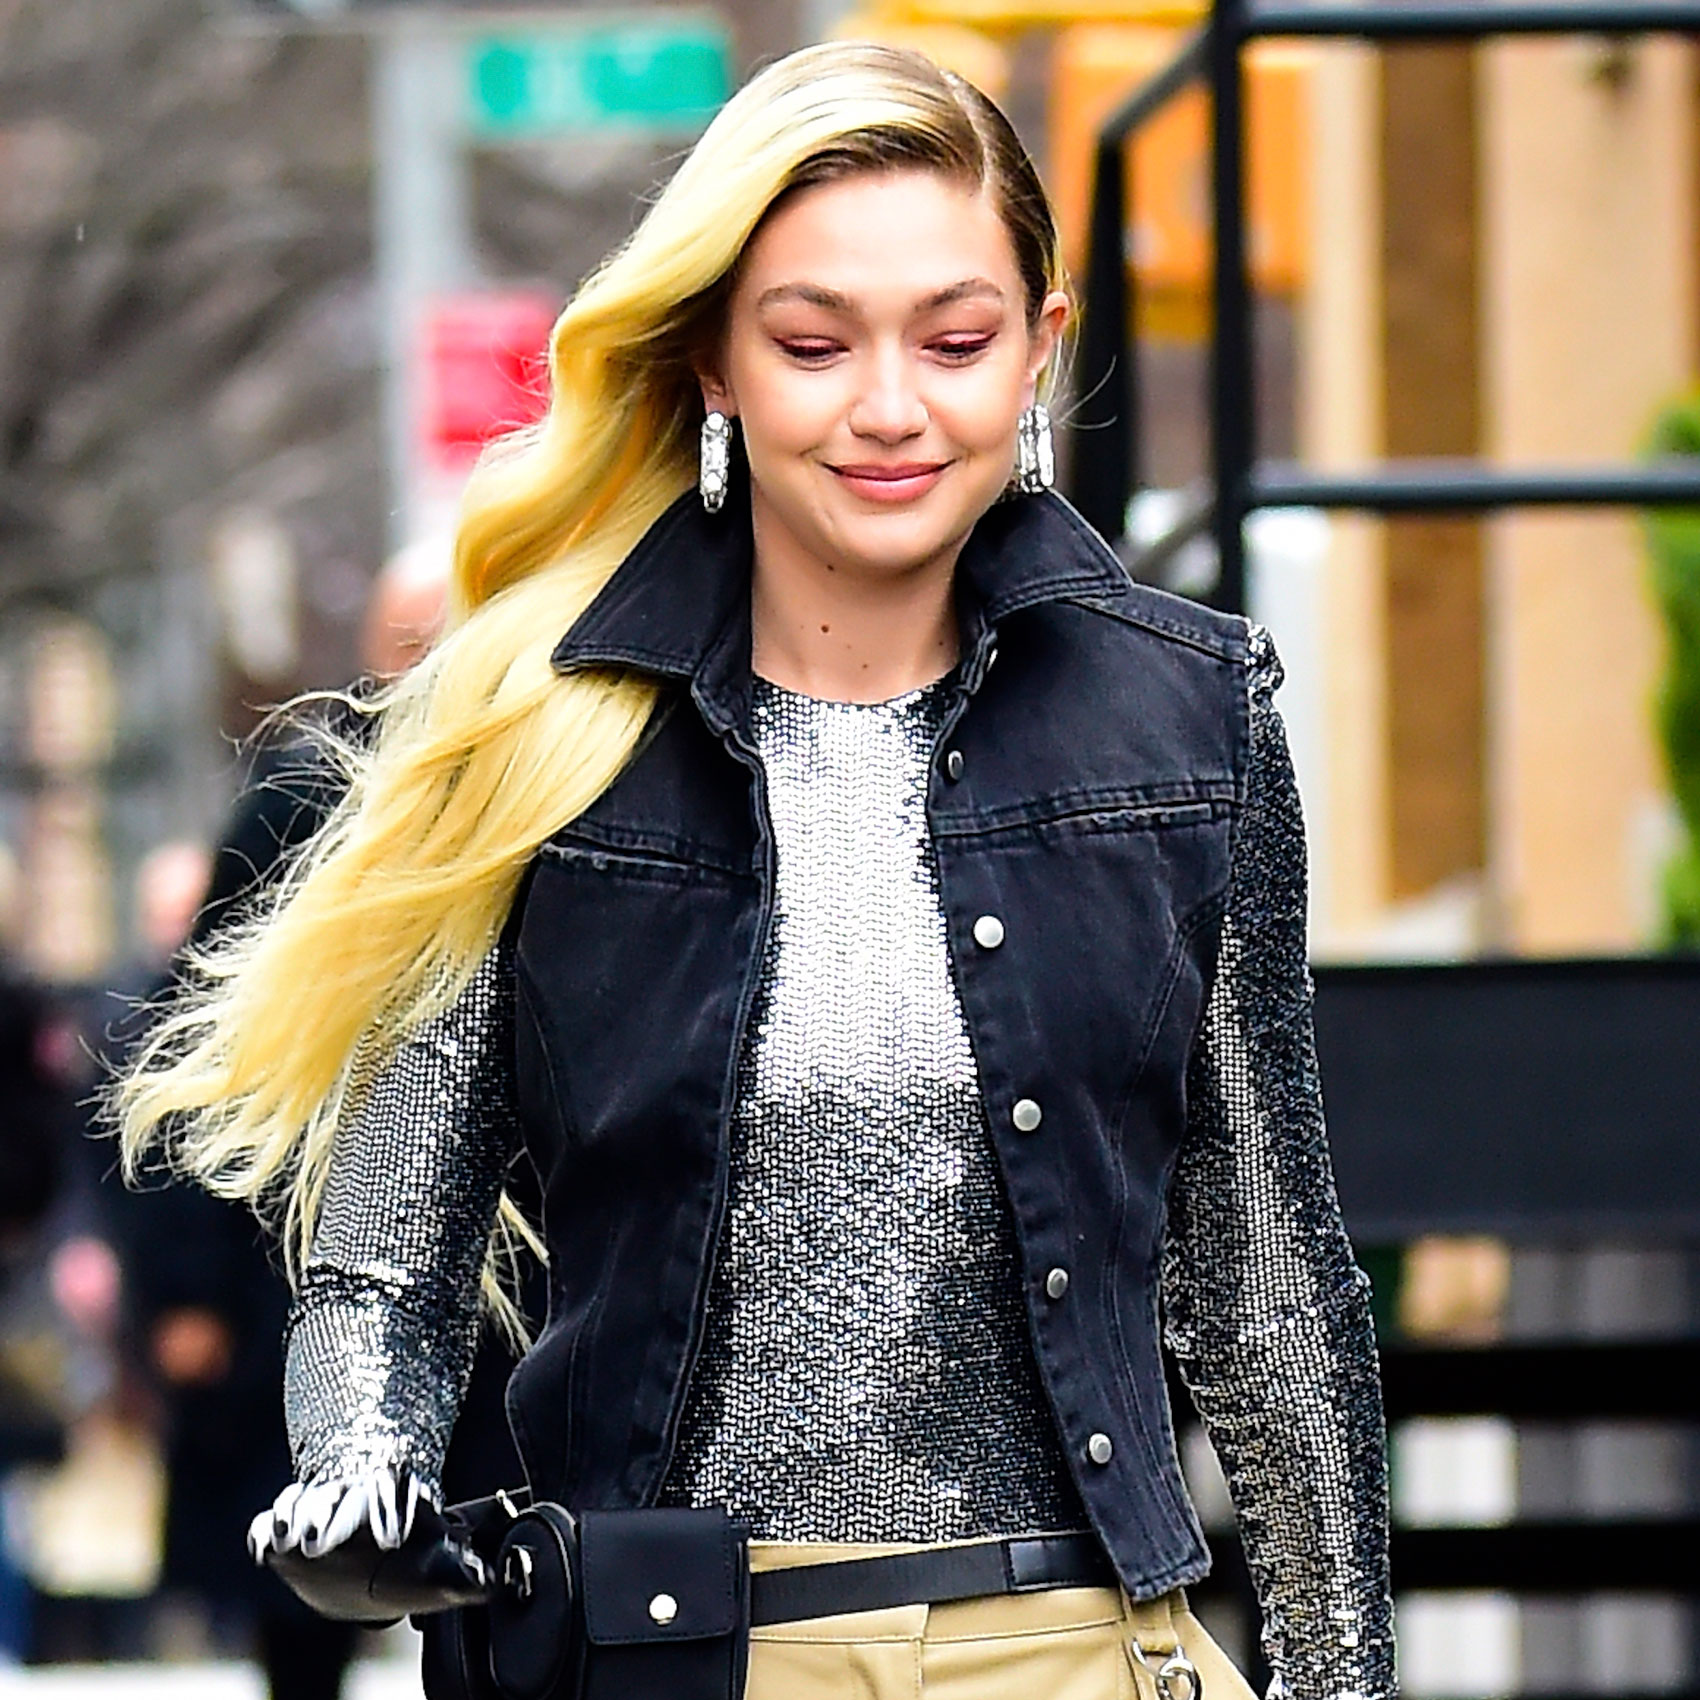 Gigi and Bella Hadid Are Obsessed With The Cargo Pants Revival